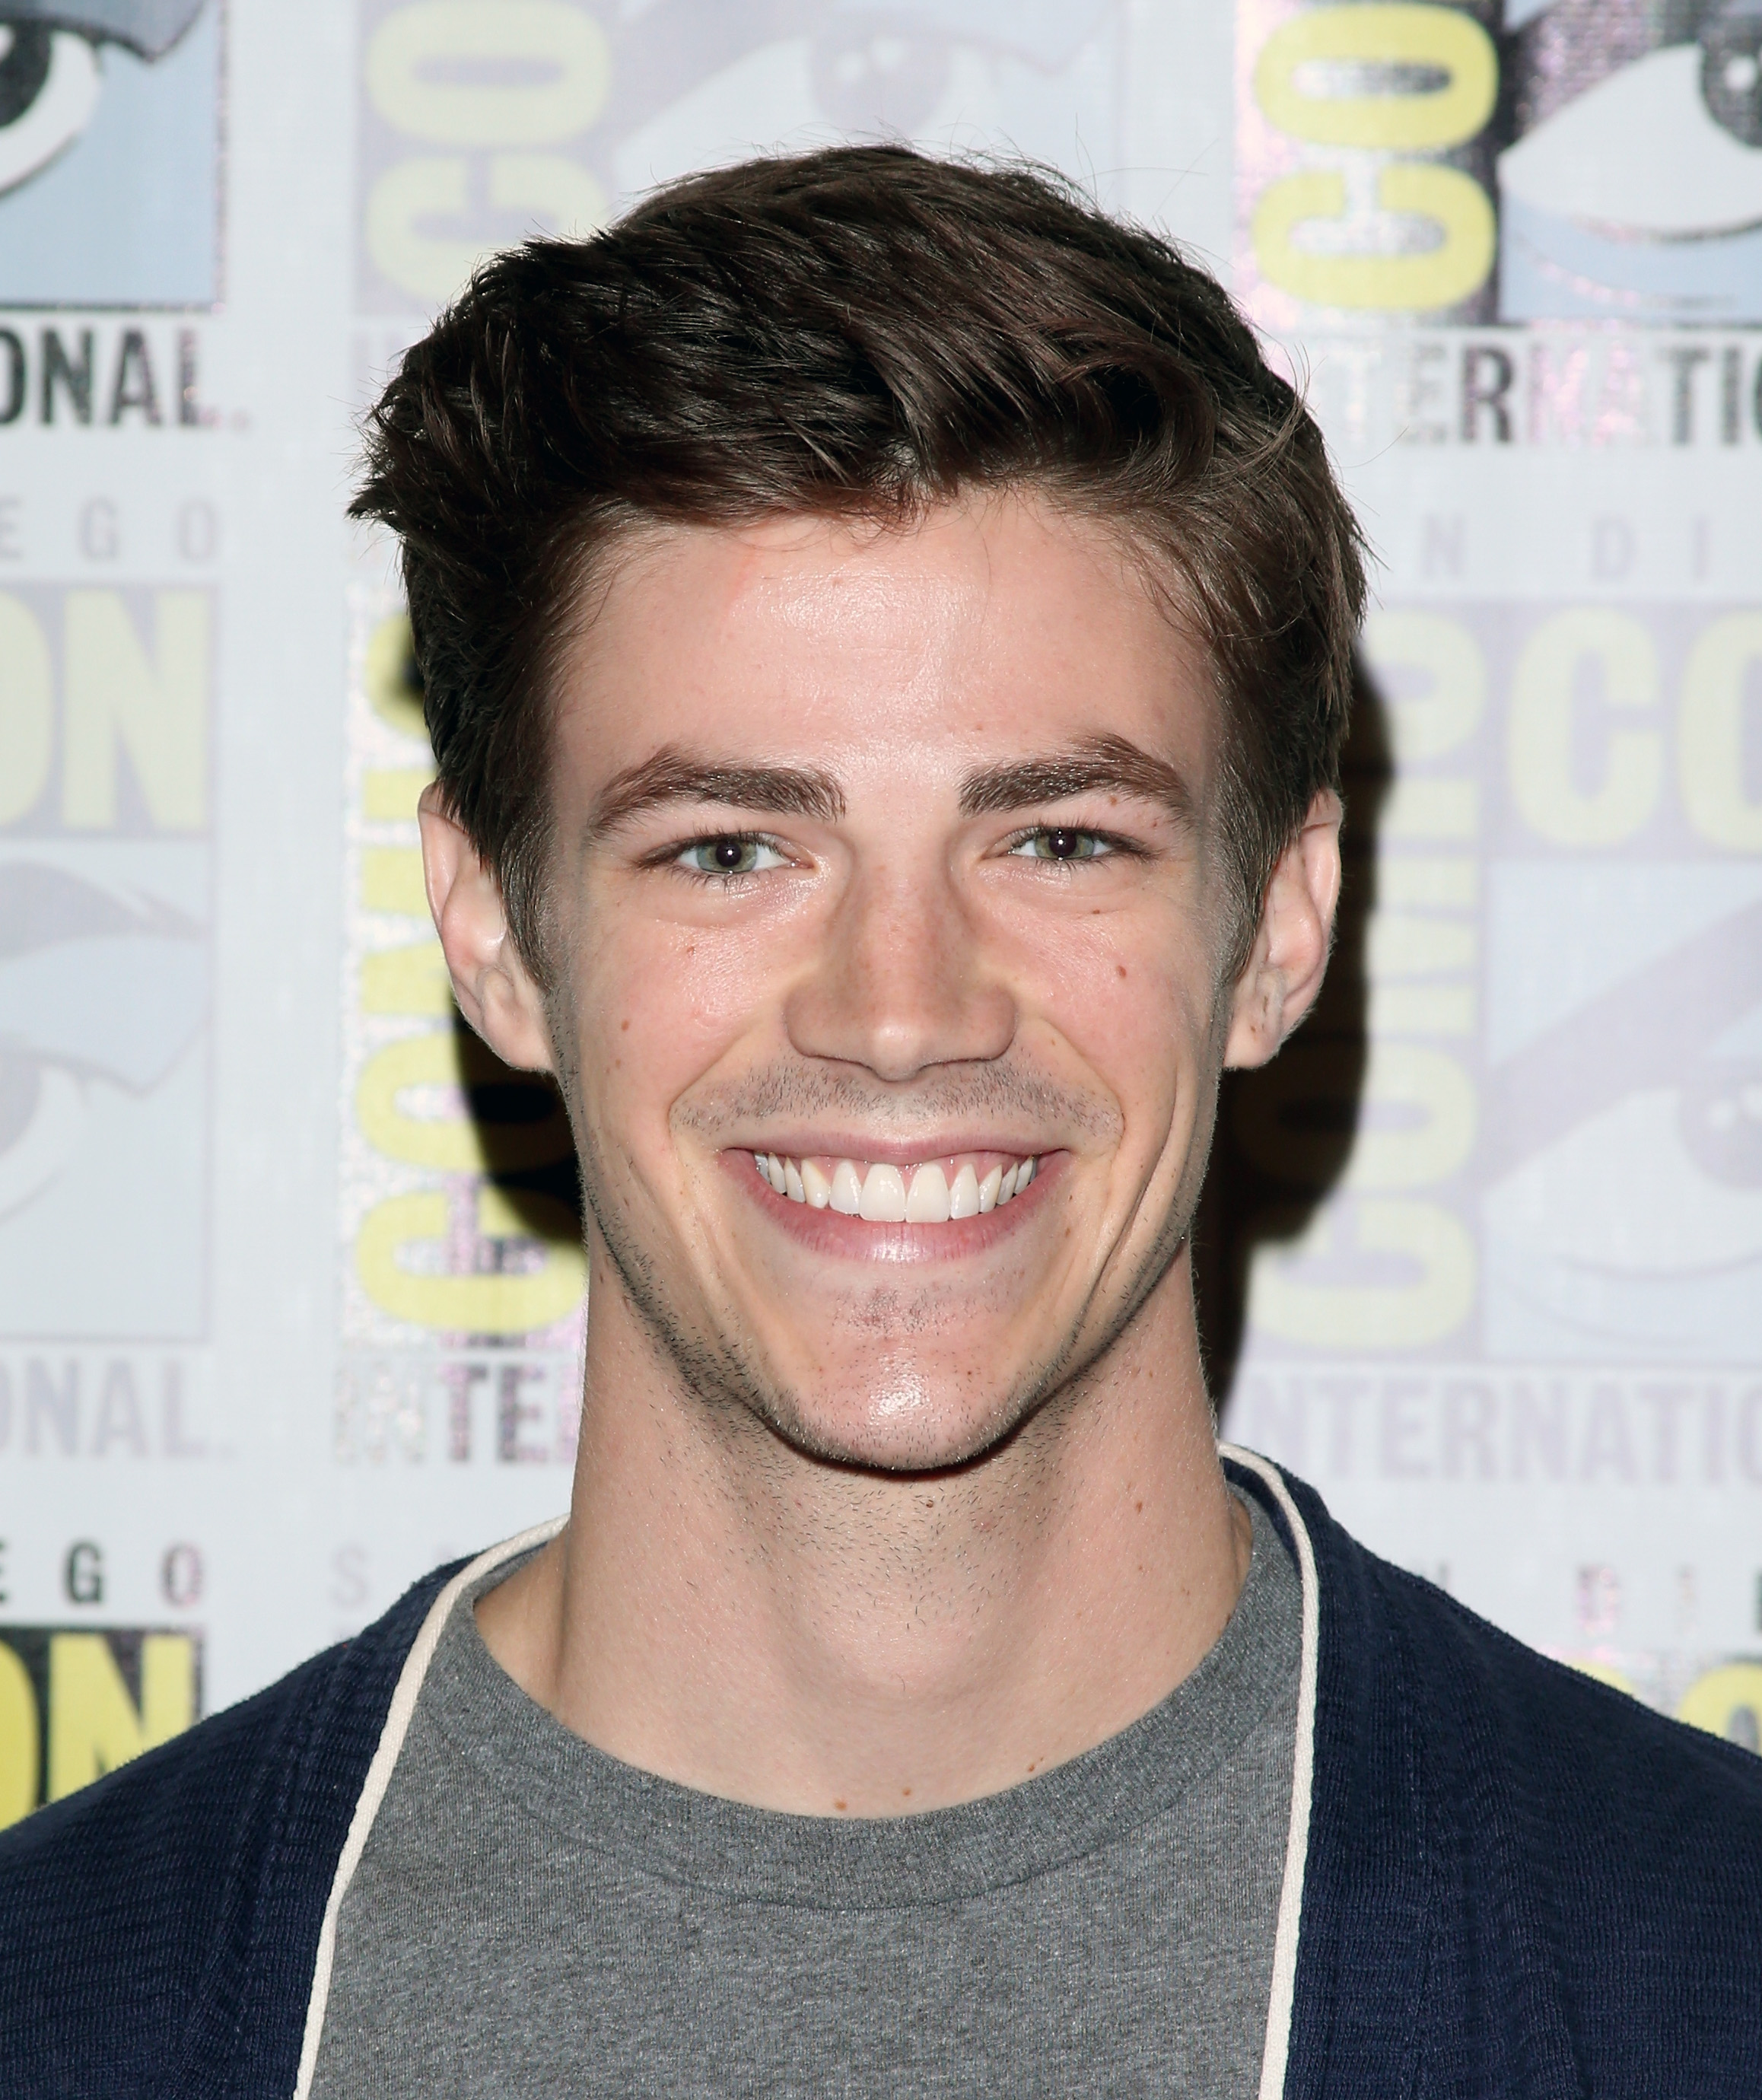 More Pictures Of Grant Gustin. grant gustin photos. 